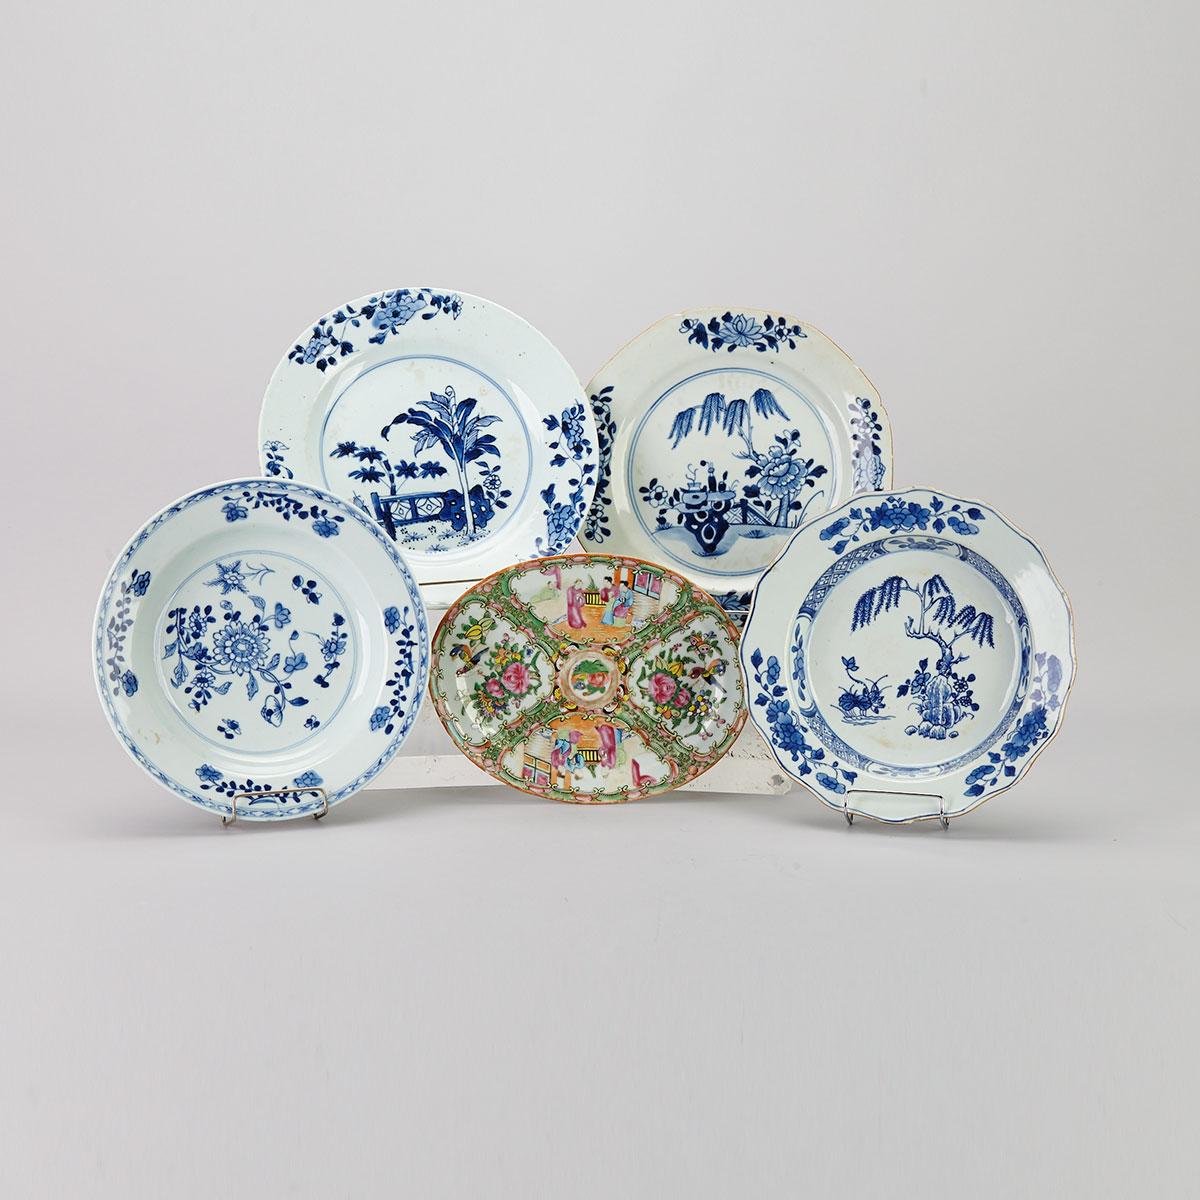 Four Blue and White Export Plates, 17th/18th Century